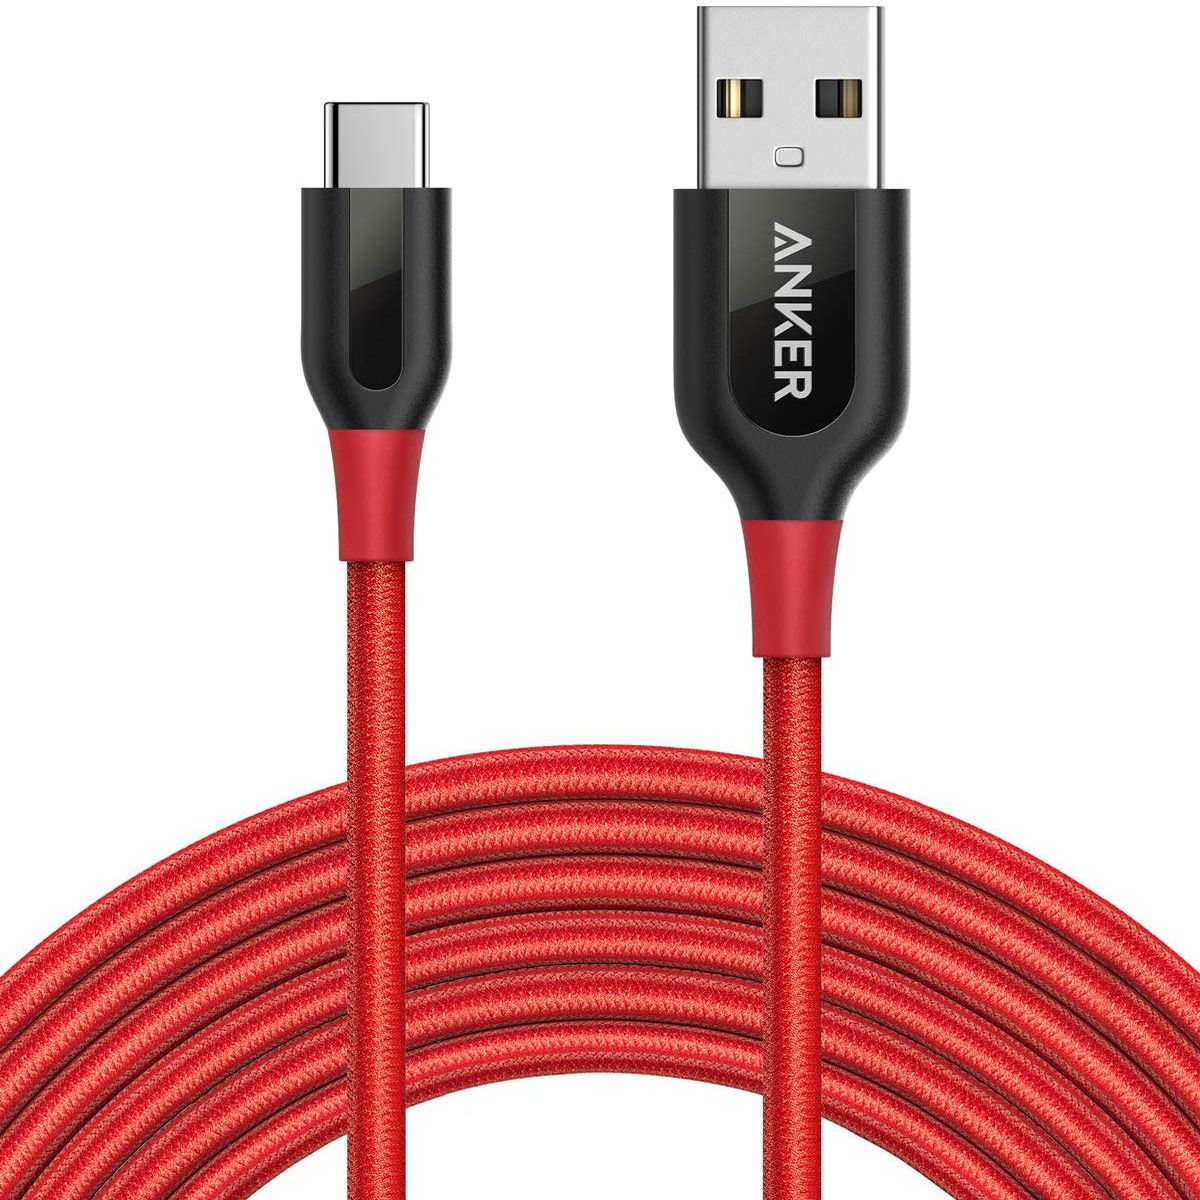 Product shot of a 10-foot USB-C cord